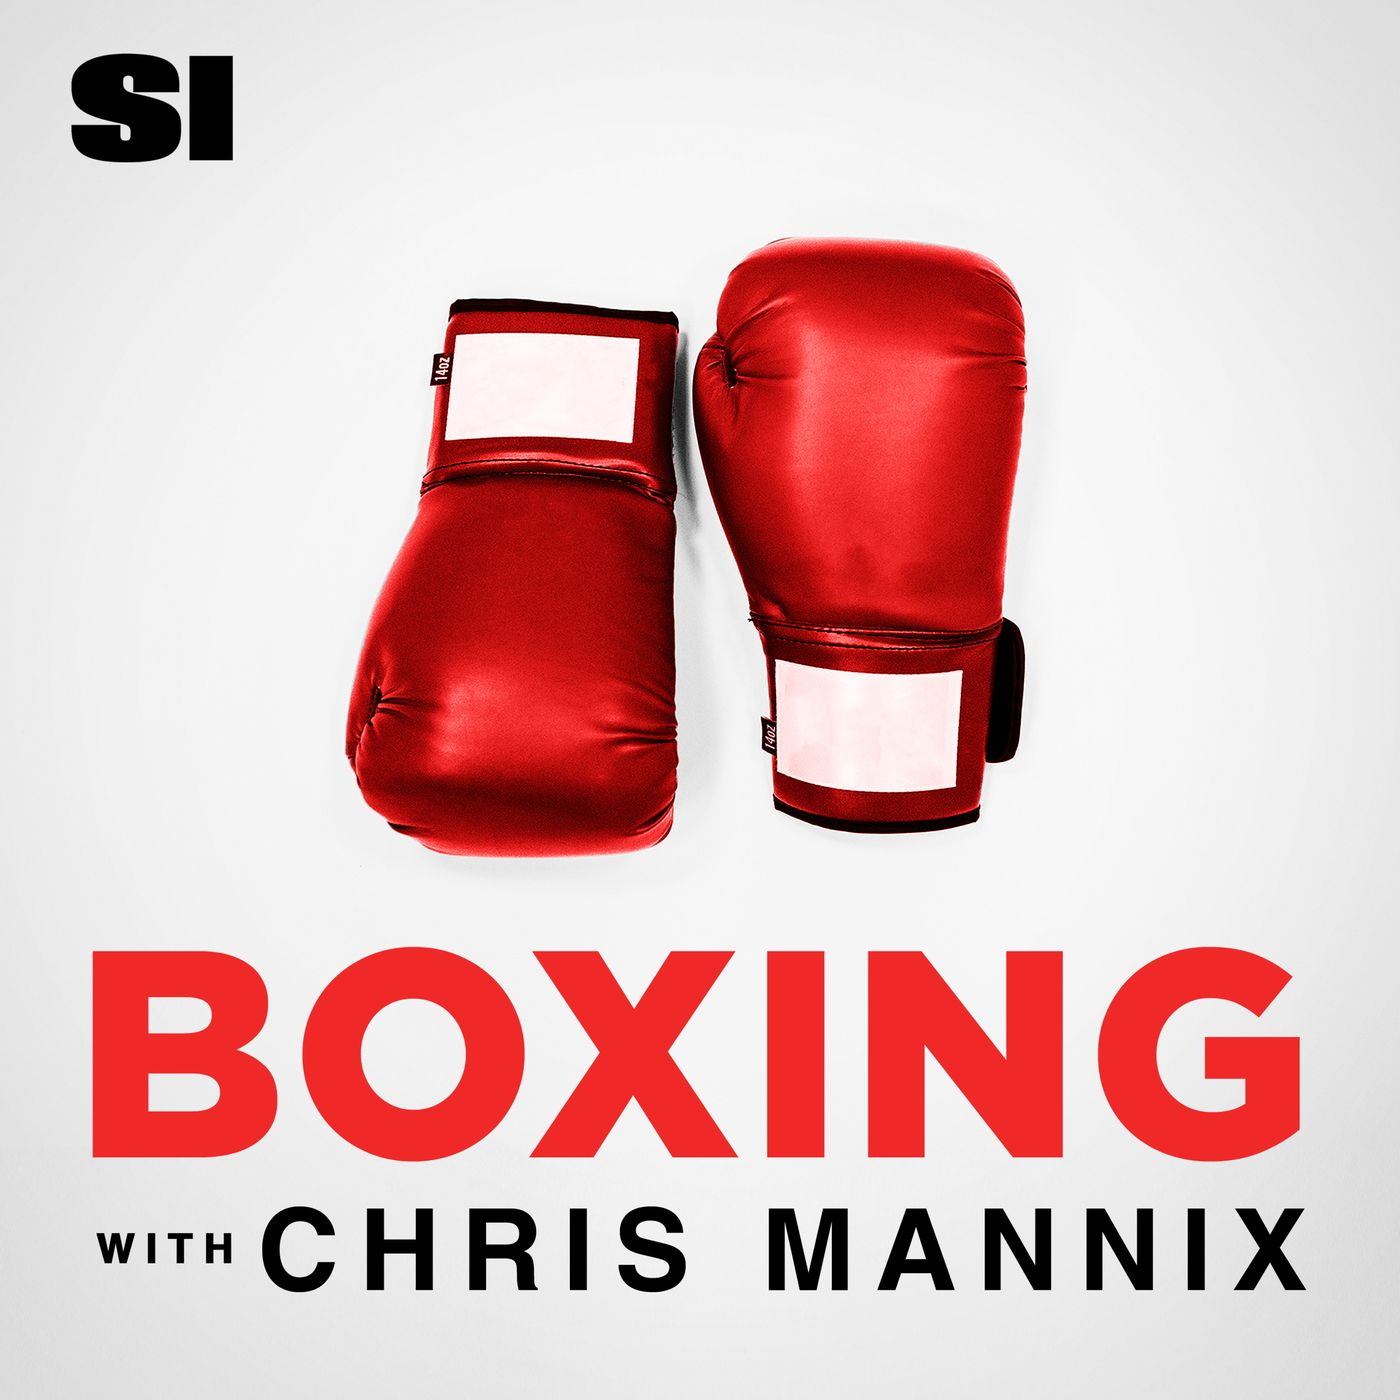 A highlight from Boxing with Chris Mannix - Will Tank Davis - Ryan Garcia happen?